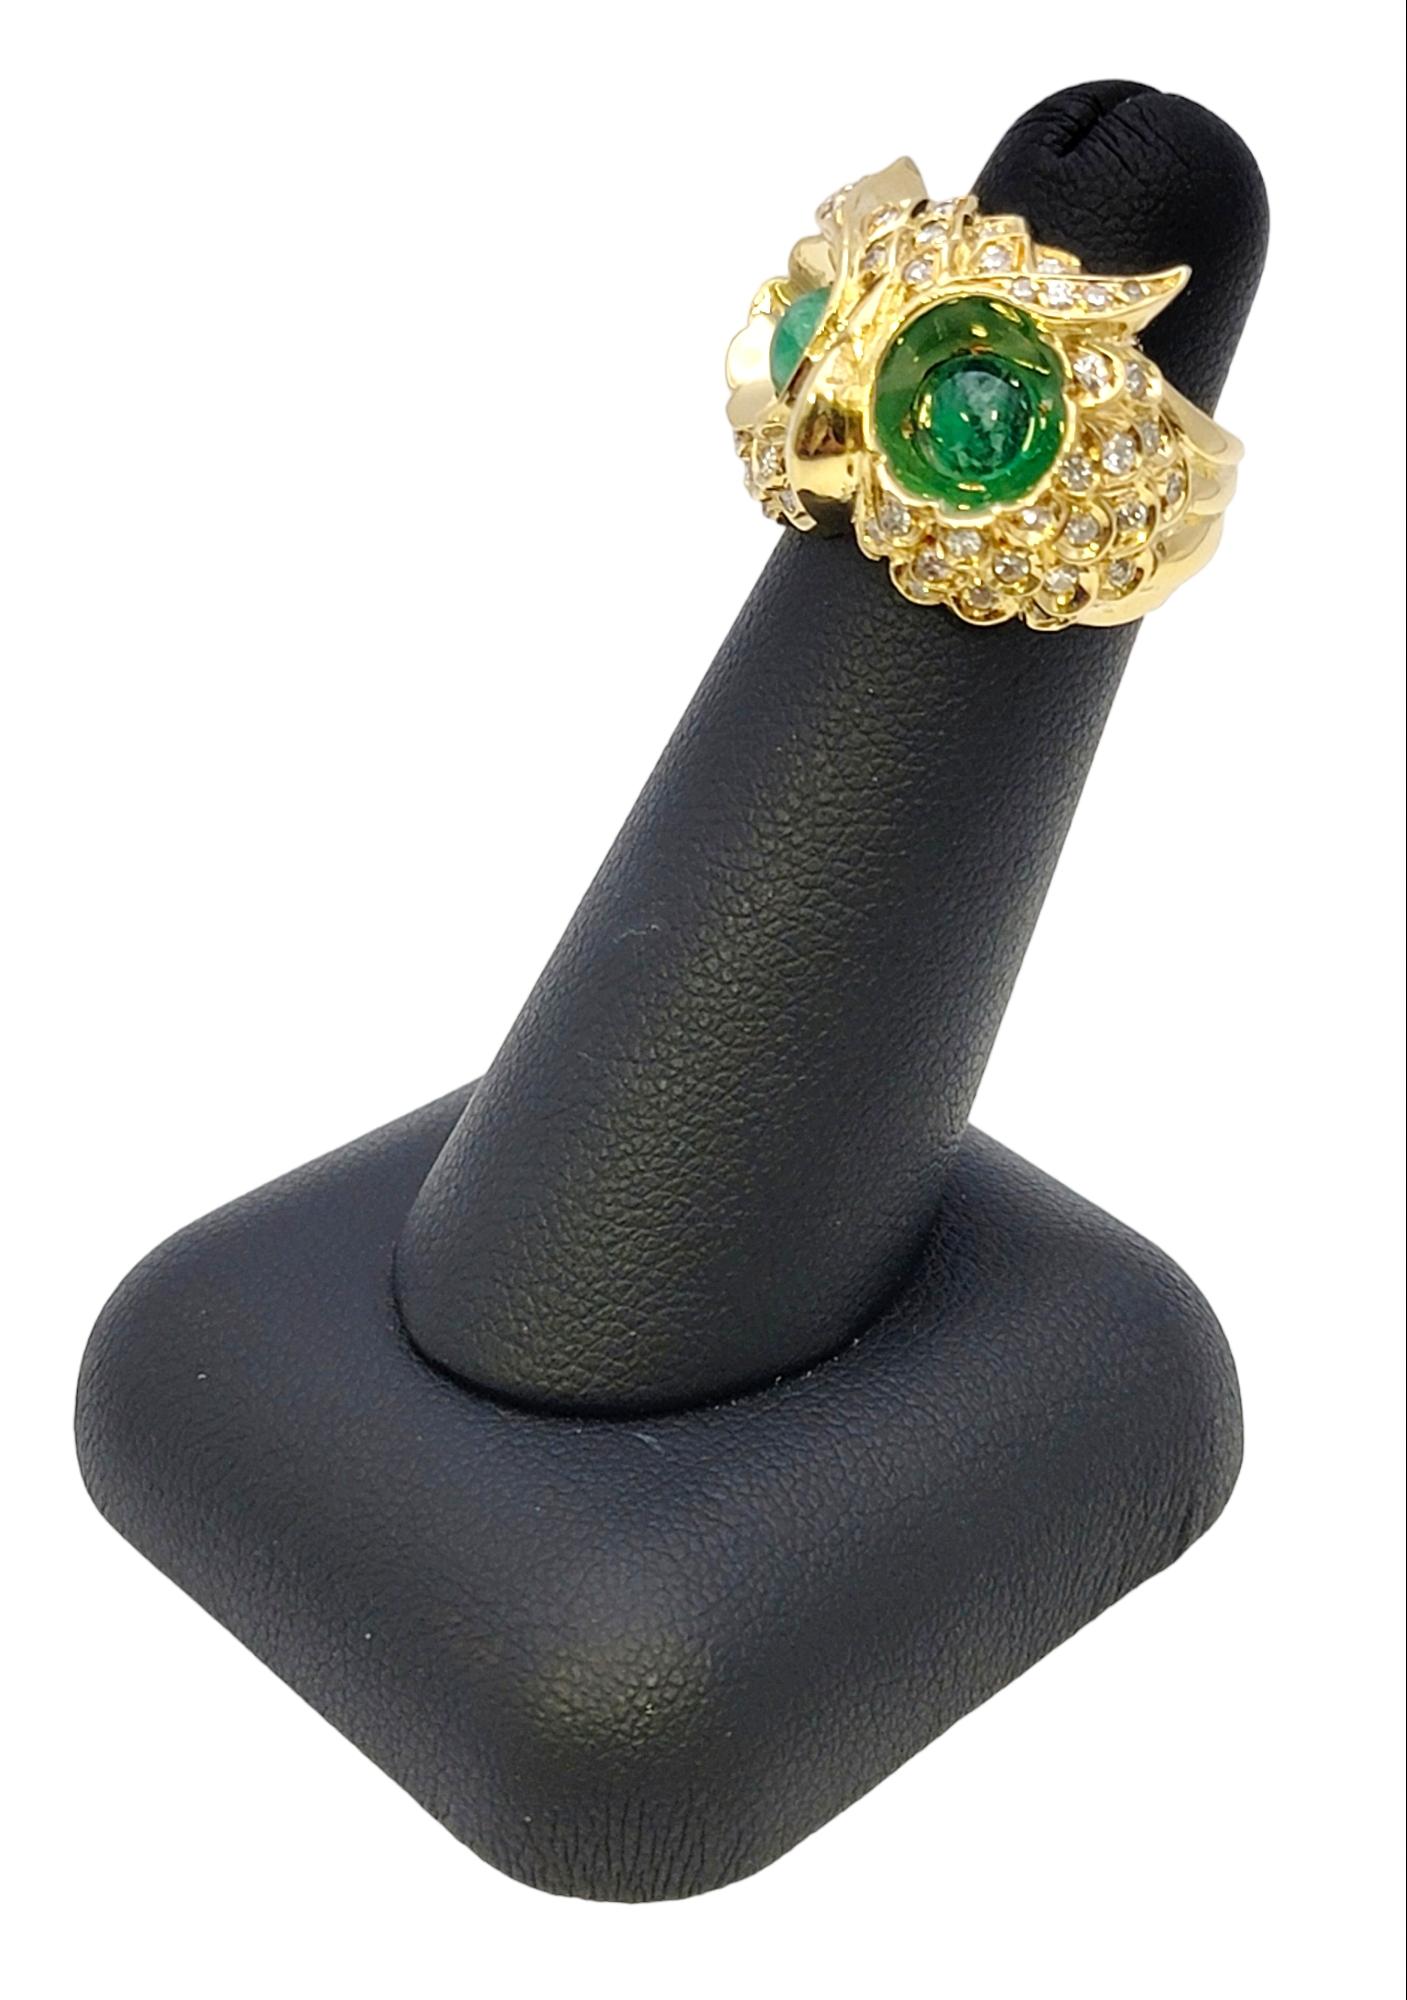 Diamond Embellished Owl Ring with Cabochon Emerald Eyes in 14 Karat Yellow Gold For Sale 7